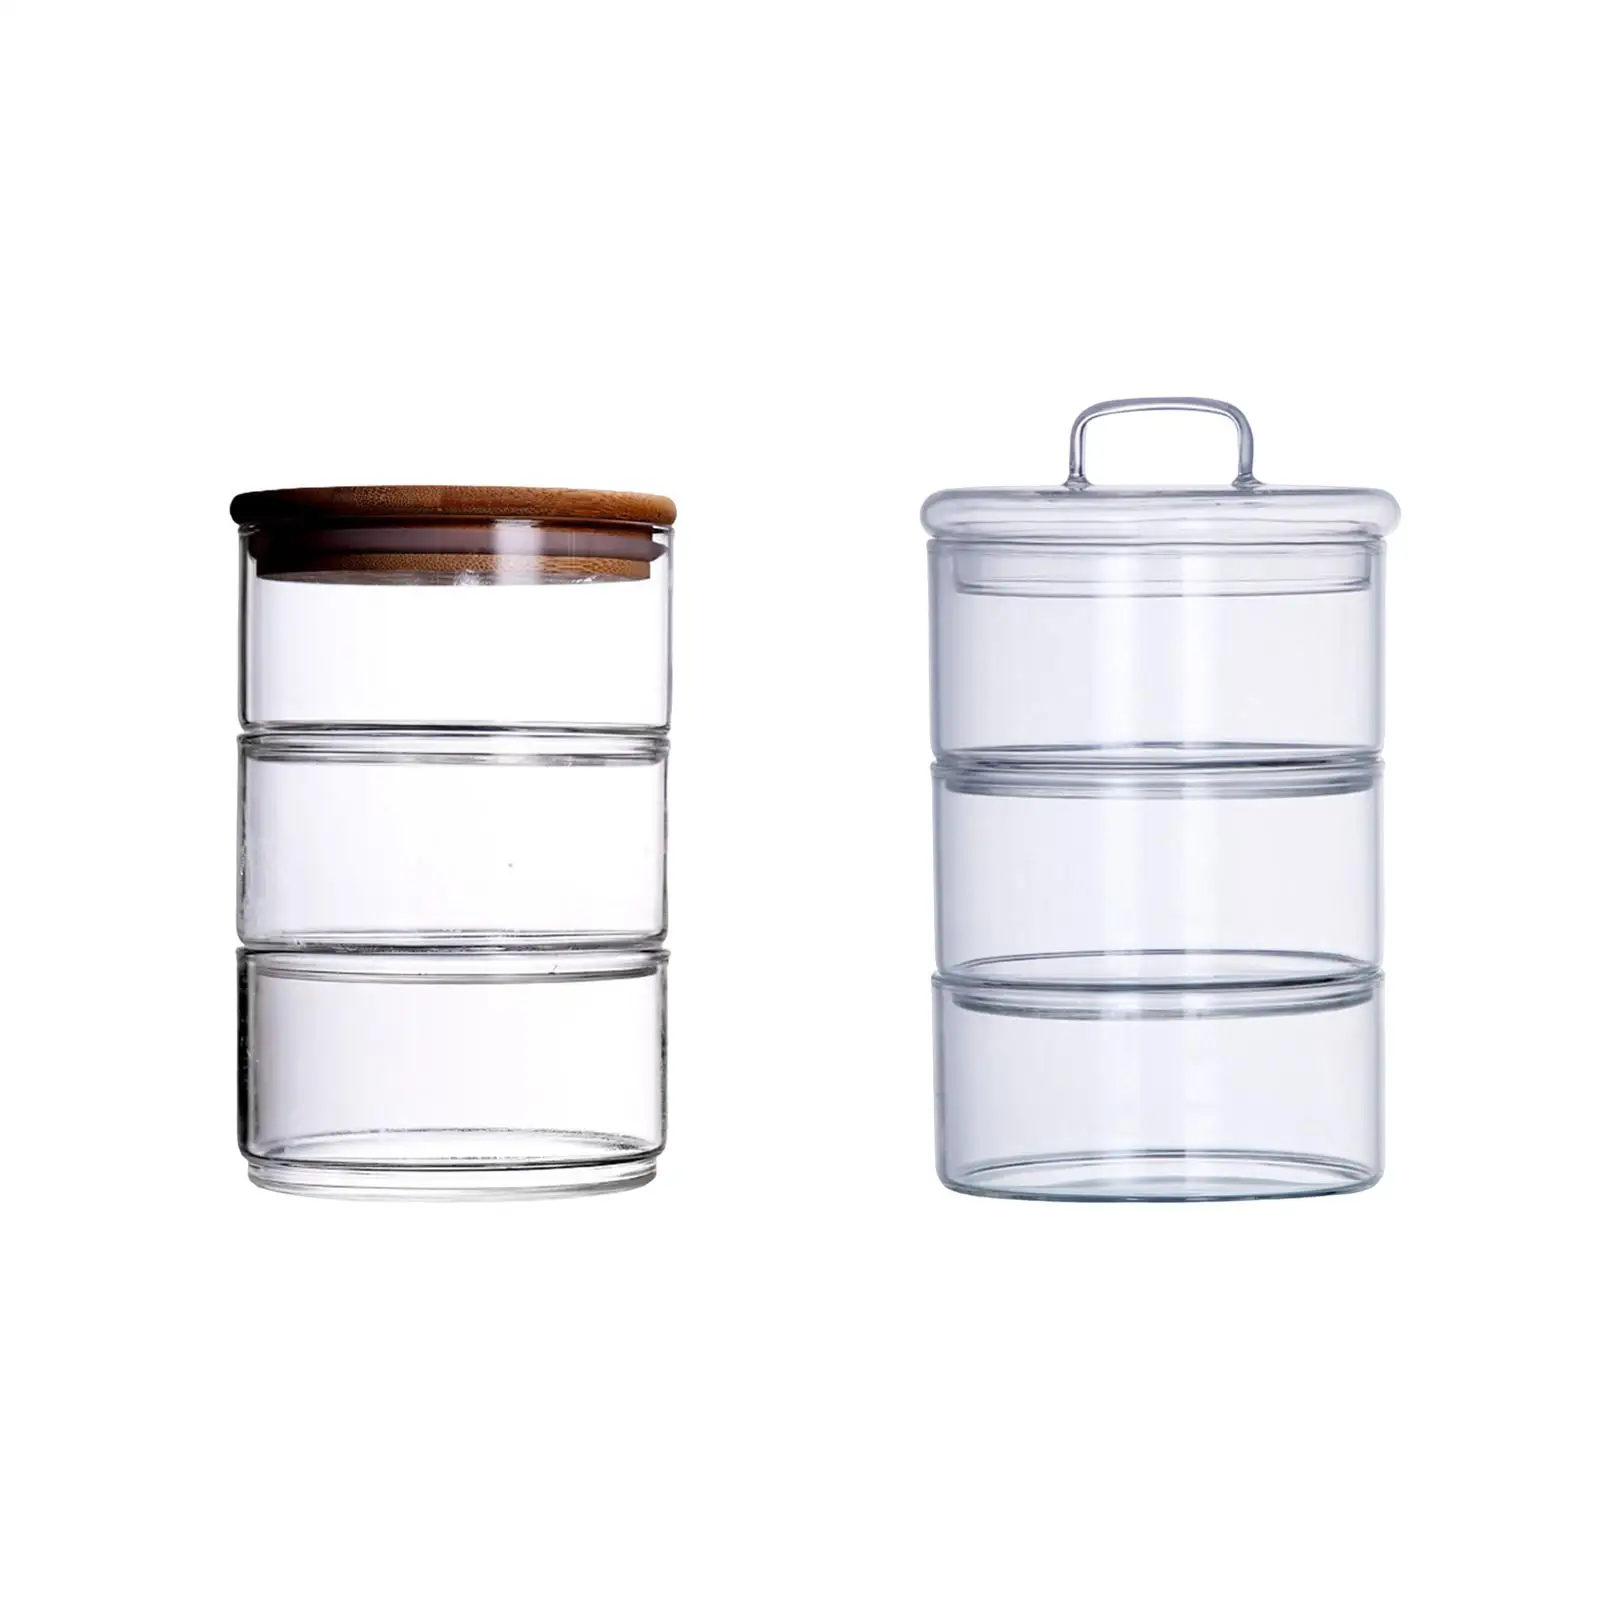 Glass Storage Jar with Lid Grain Container Sealed Clear 3 Tier Stacking Jars for Nuts Cereal Countertop Shelf Cupboard